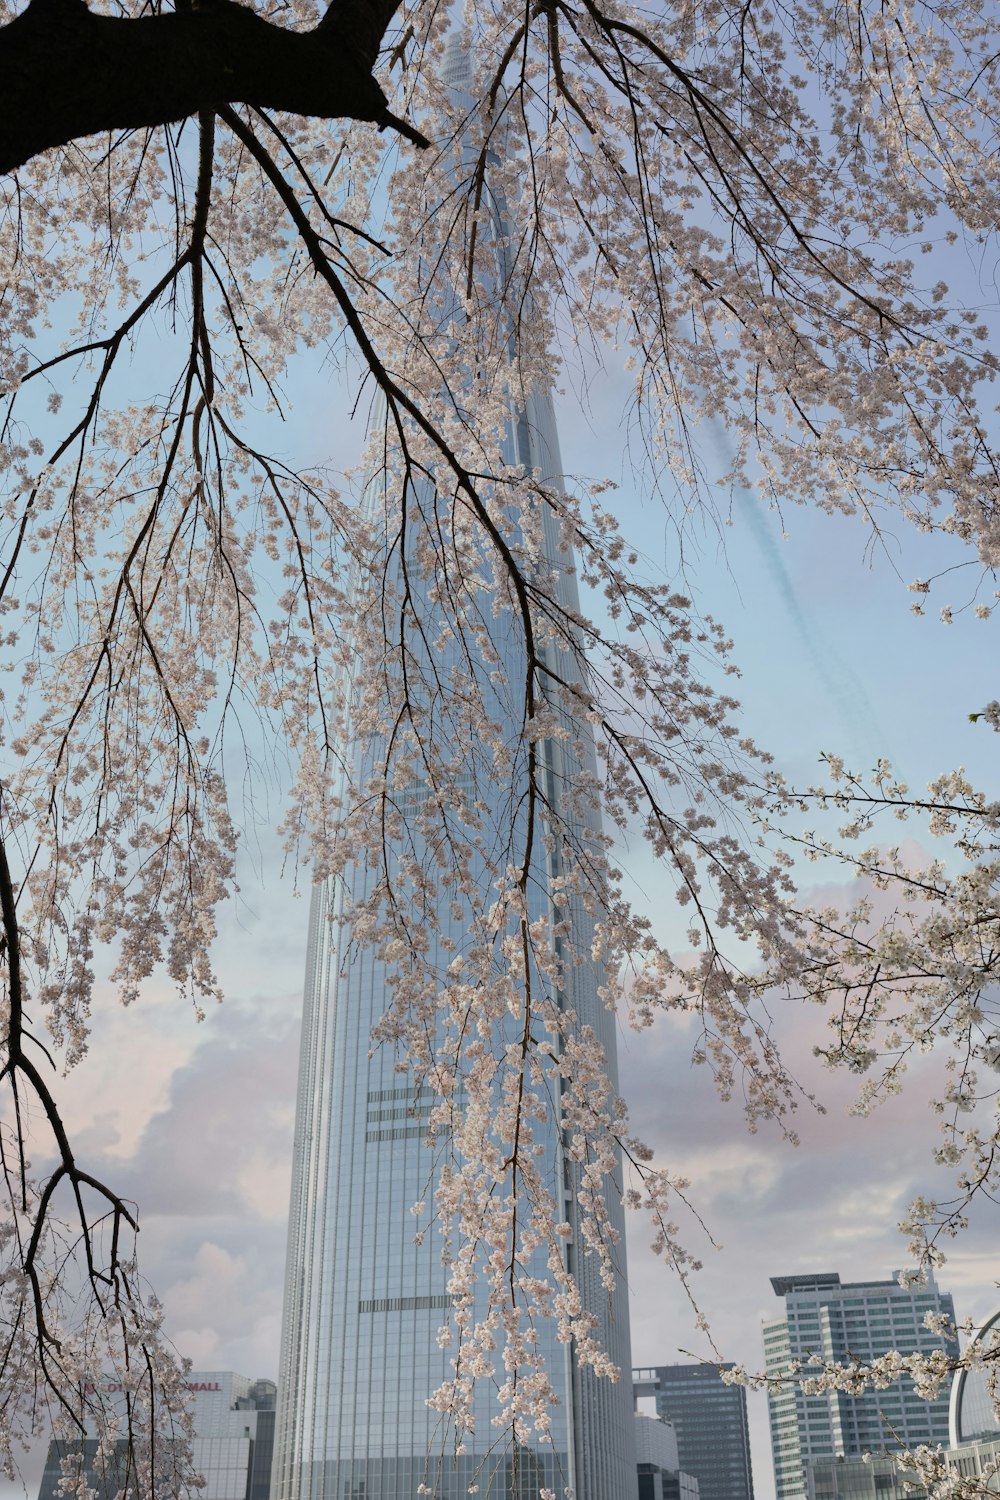 a tall building towering over a city next to a tree